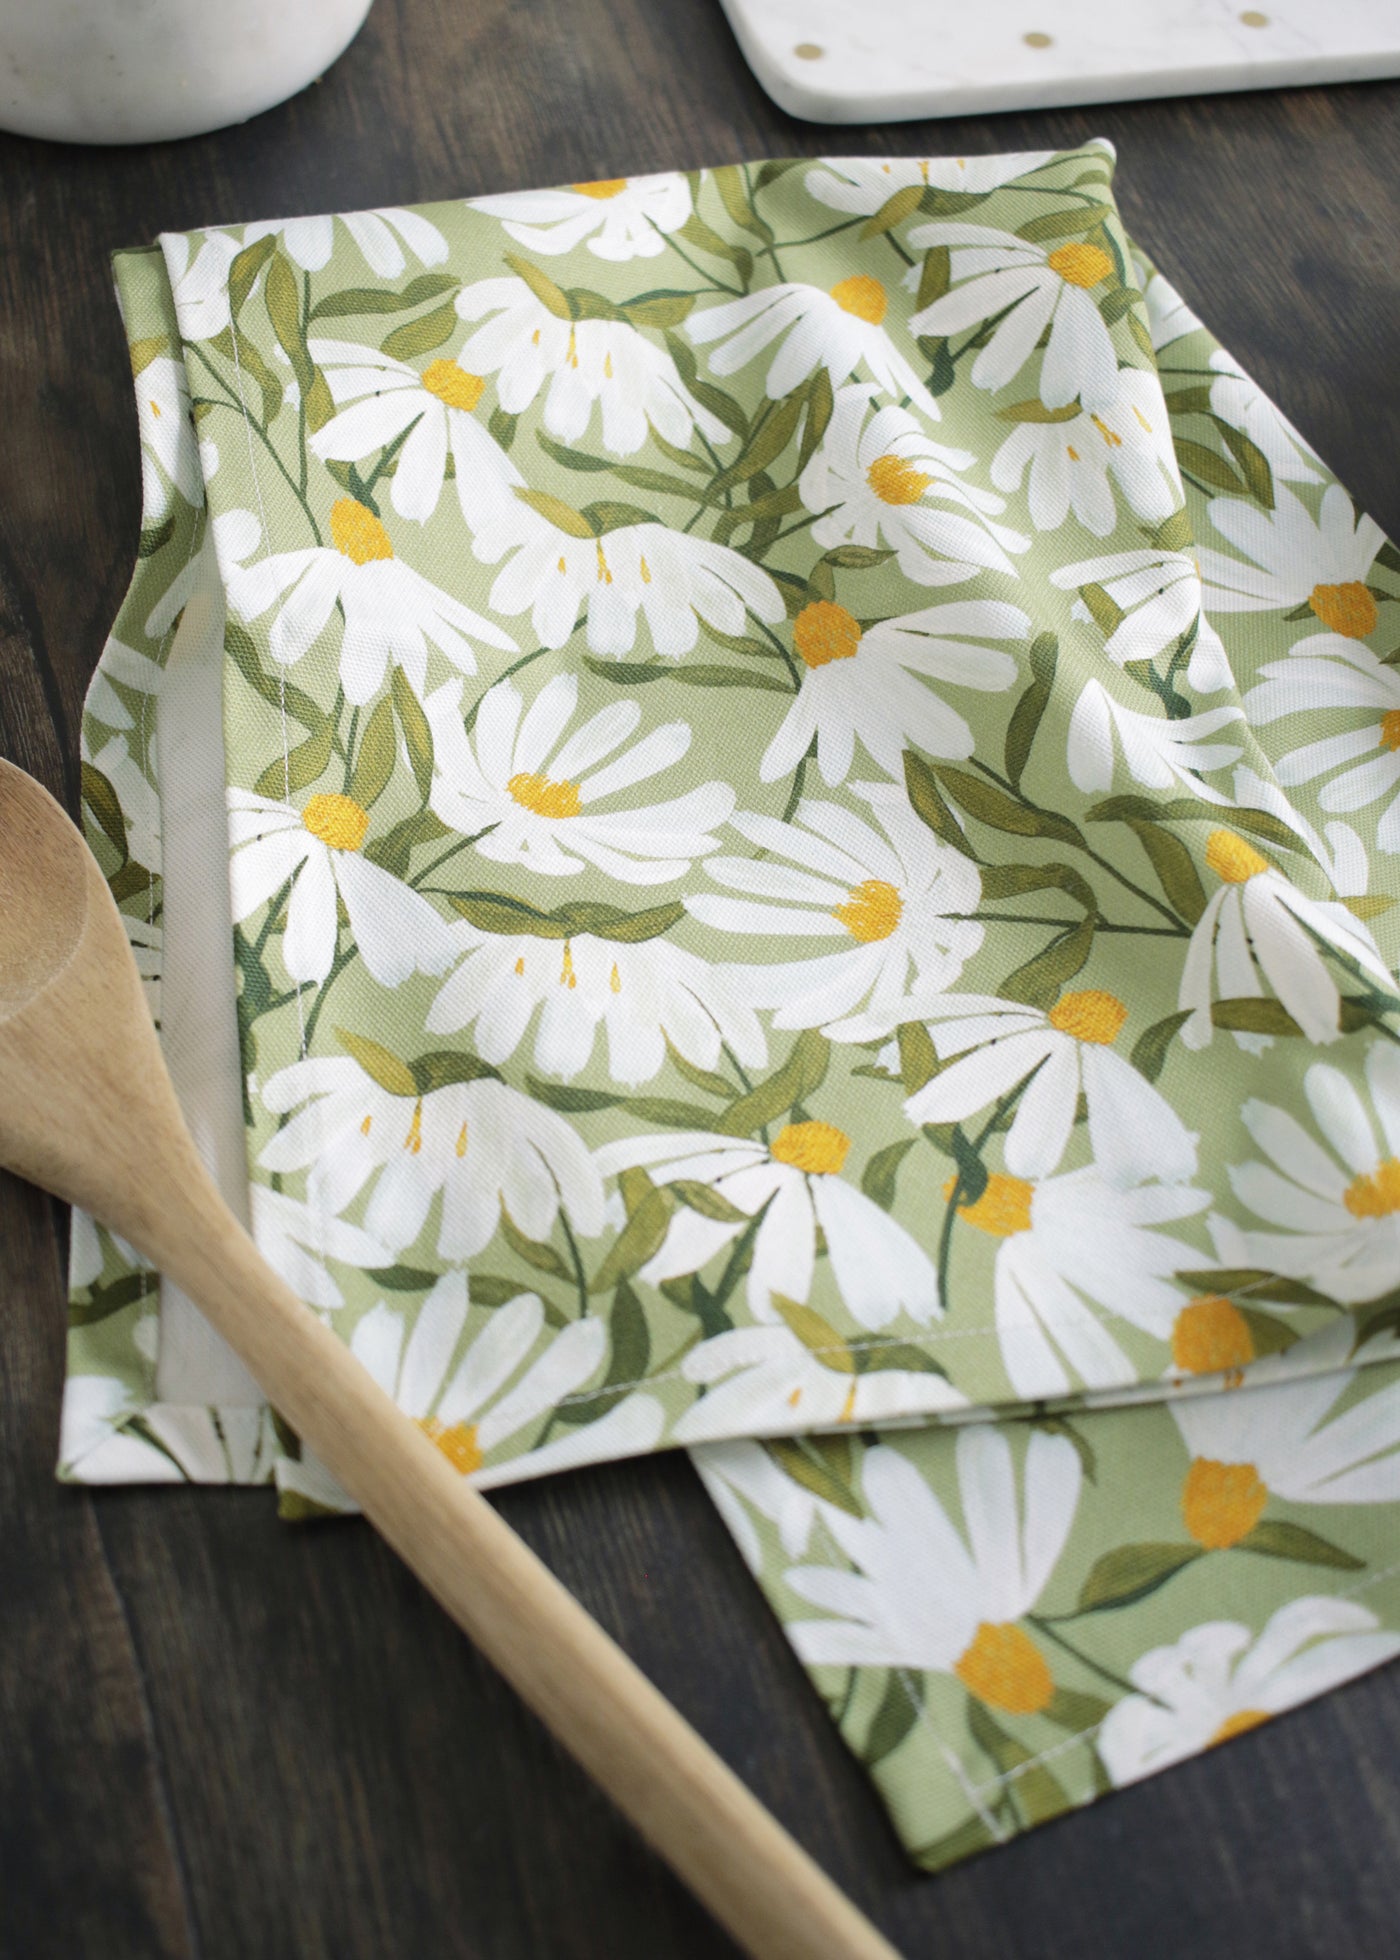 a green cotton tea towel, covered in painted white daisy flowers, sitting on a dark wood table alongside plates and utensils